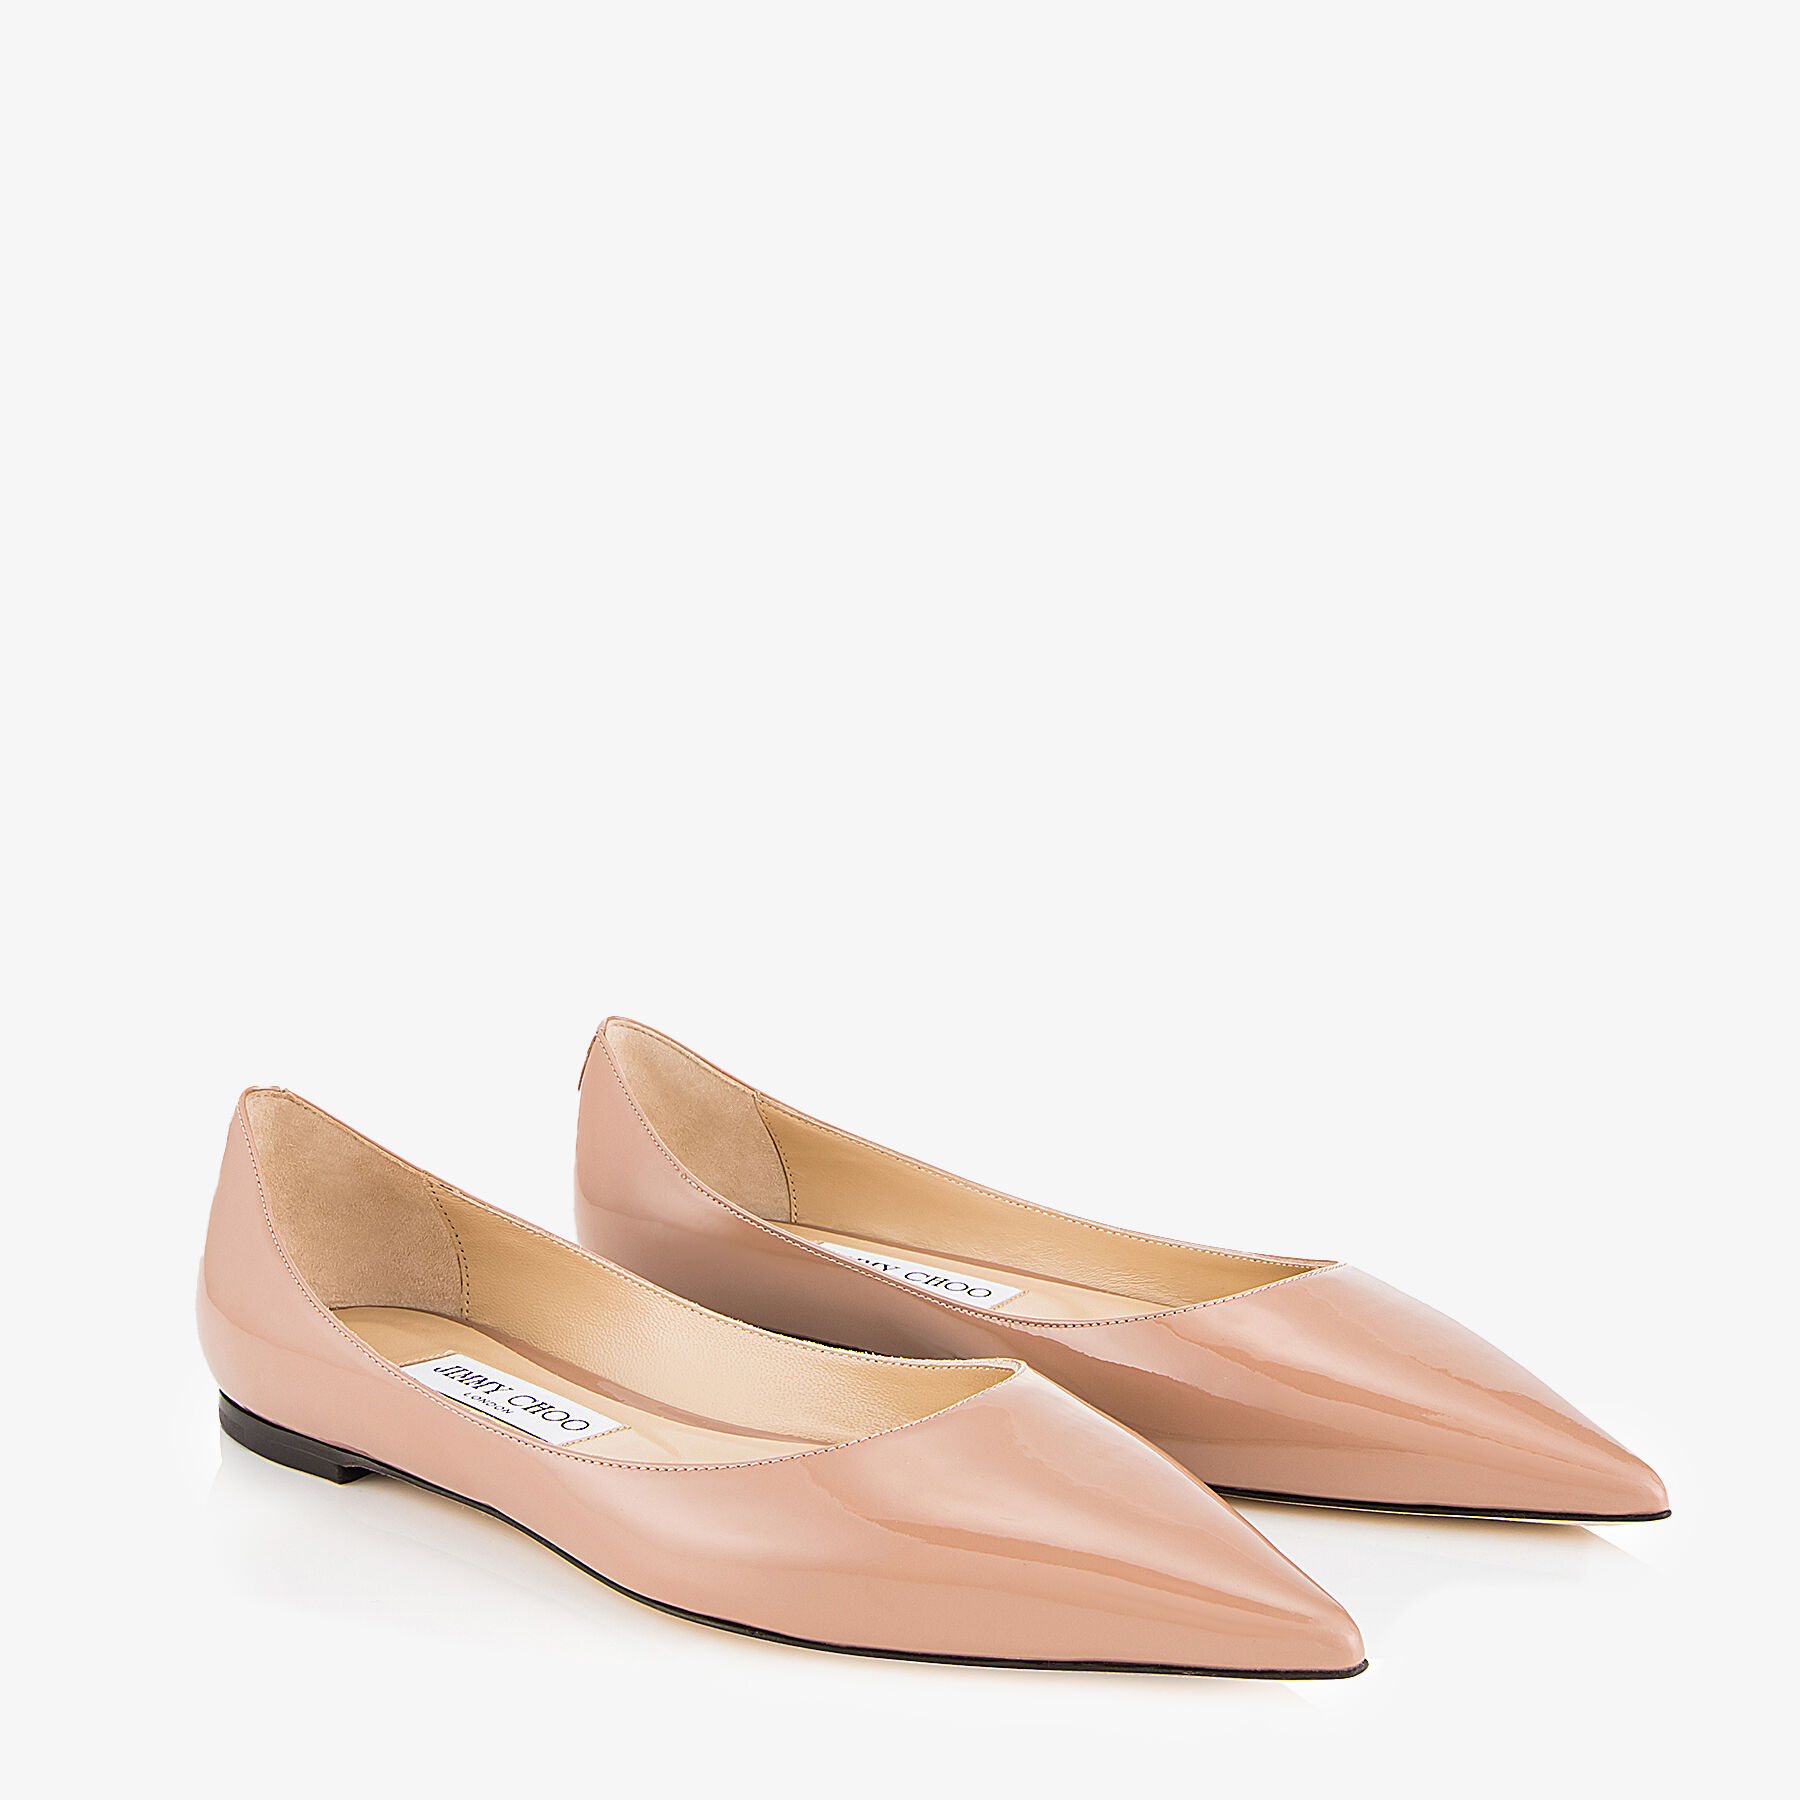 Ballet-Pink Patent Leather Pointed Flats with JC Emblem | LOVE